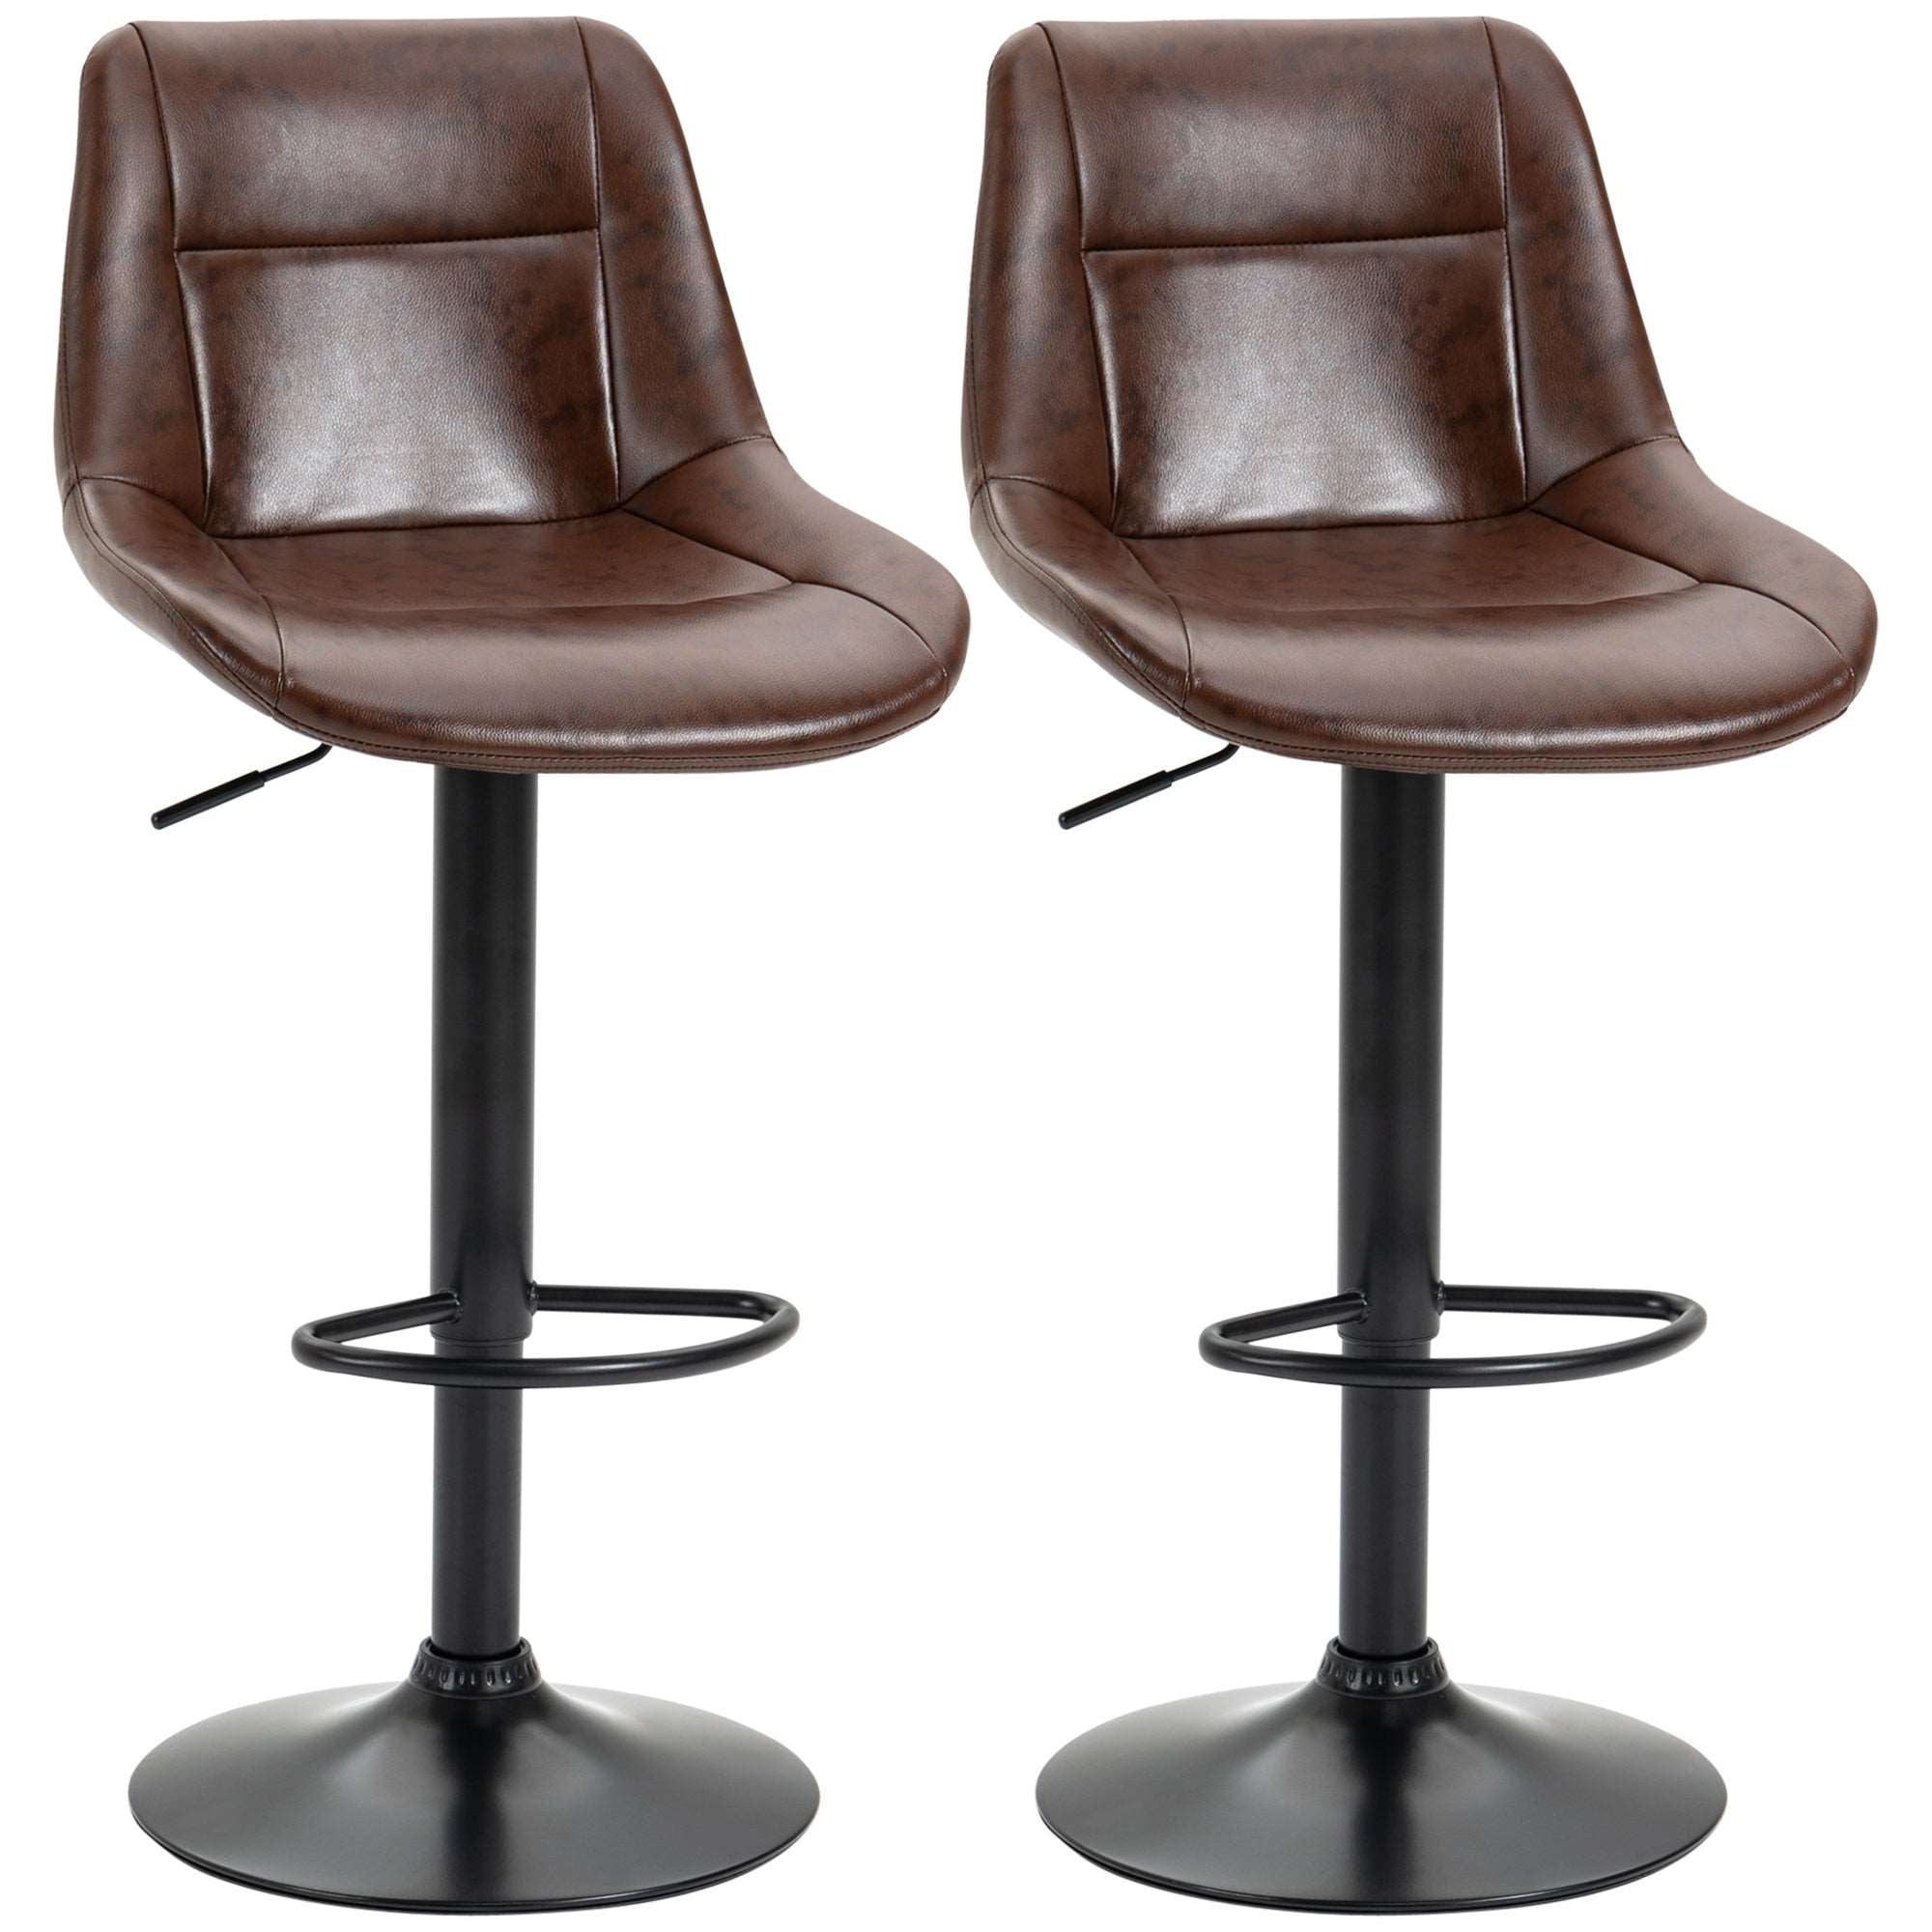 Adjustable Bar Stools Set of 2, Modern Kitchen Stools, 360 Degree Swivel Bar Height Barstools in PU Leather with Footrest, Brown  AOSOM   